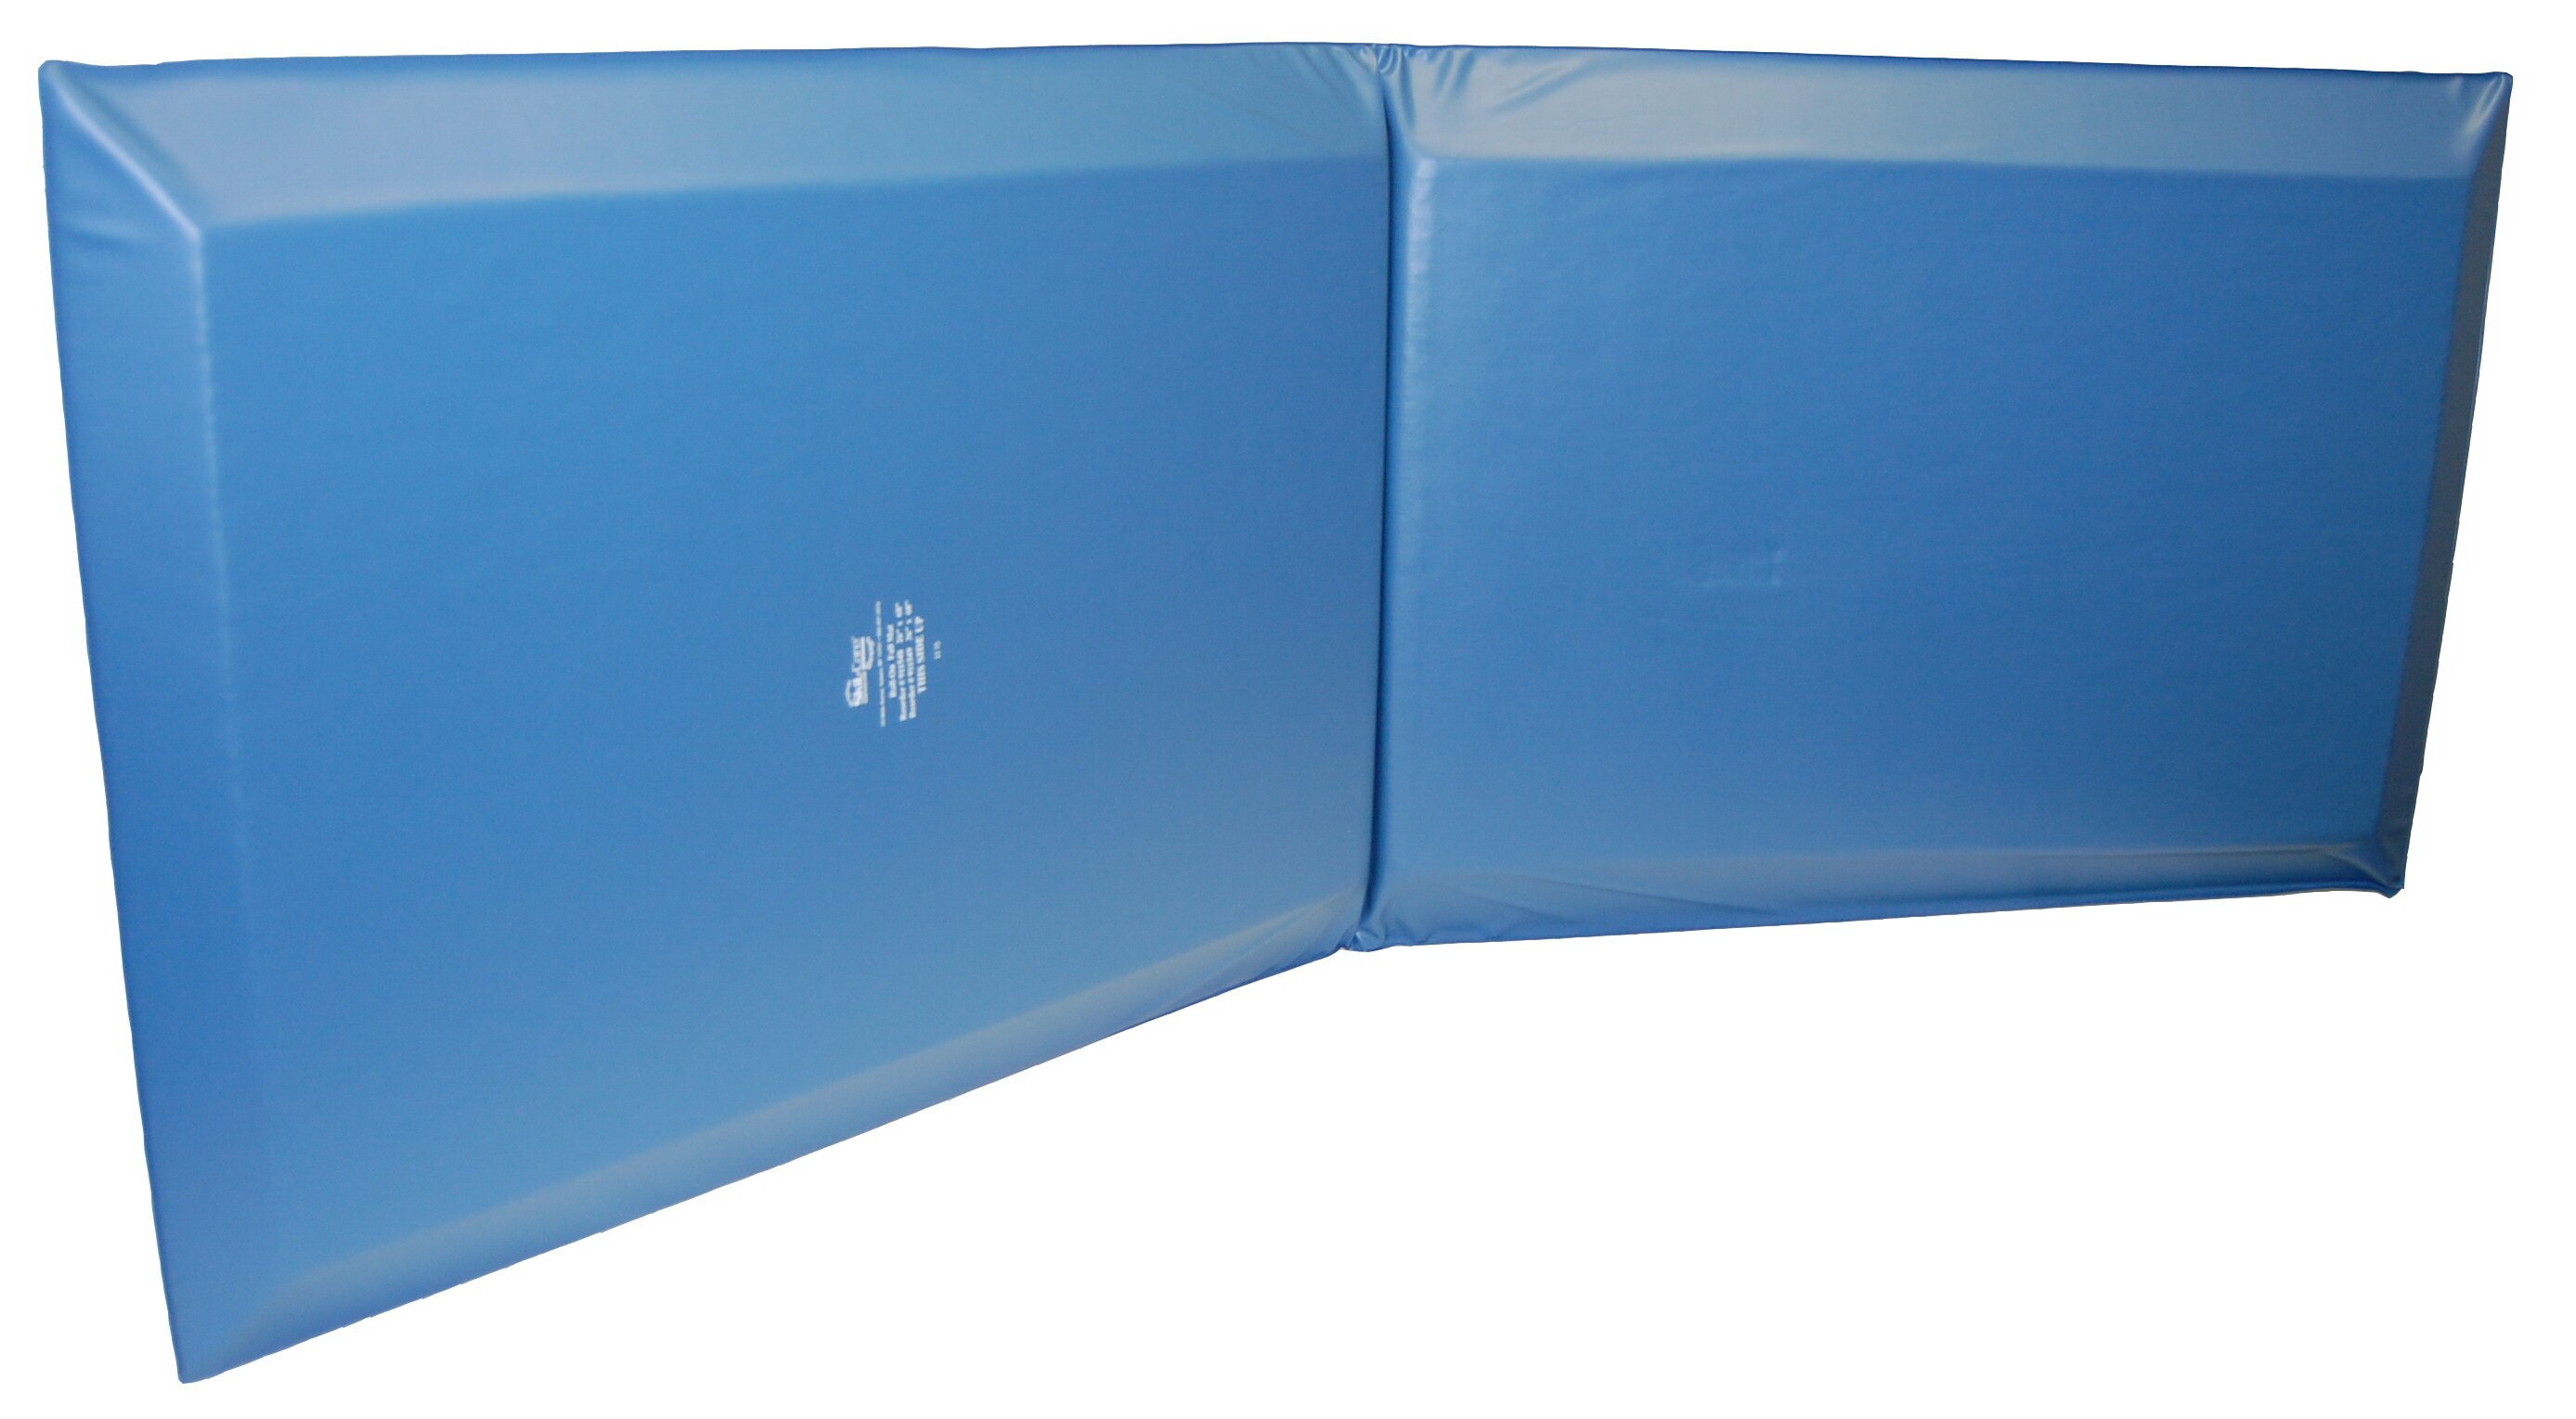 Skil-Care Roll-On Bedside Fall Mat